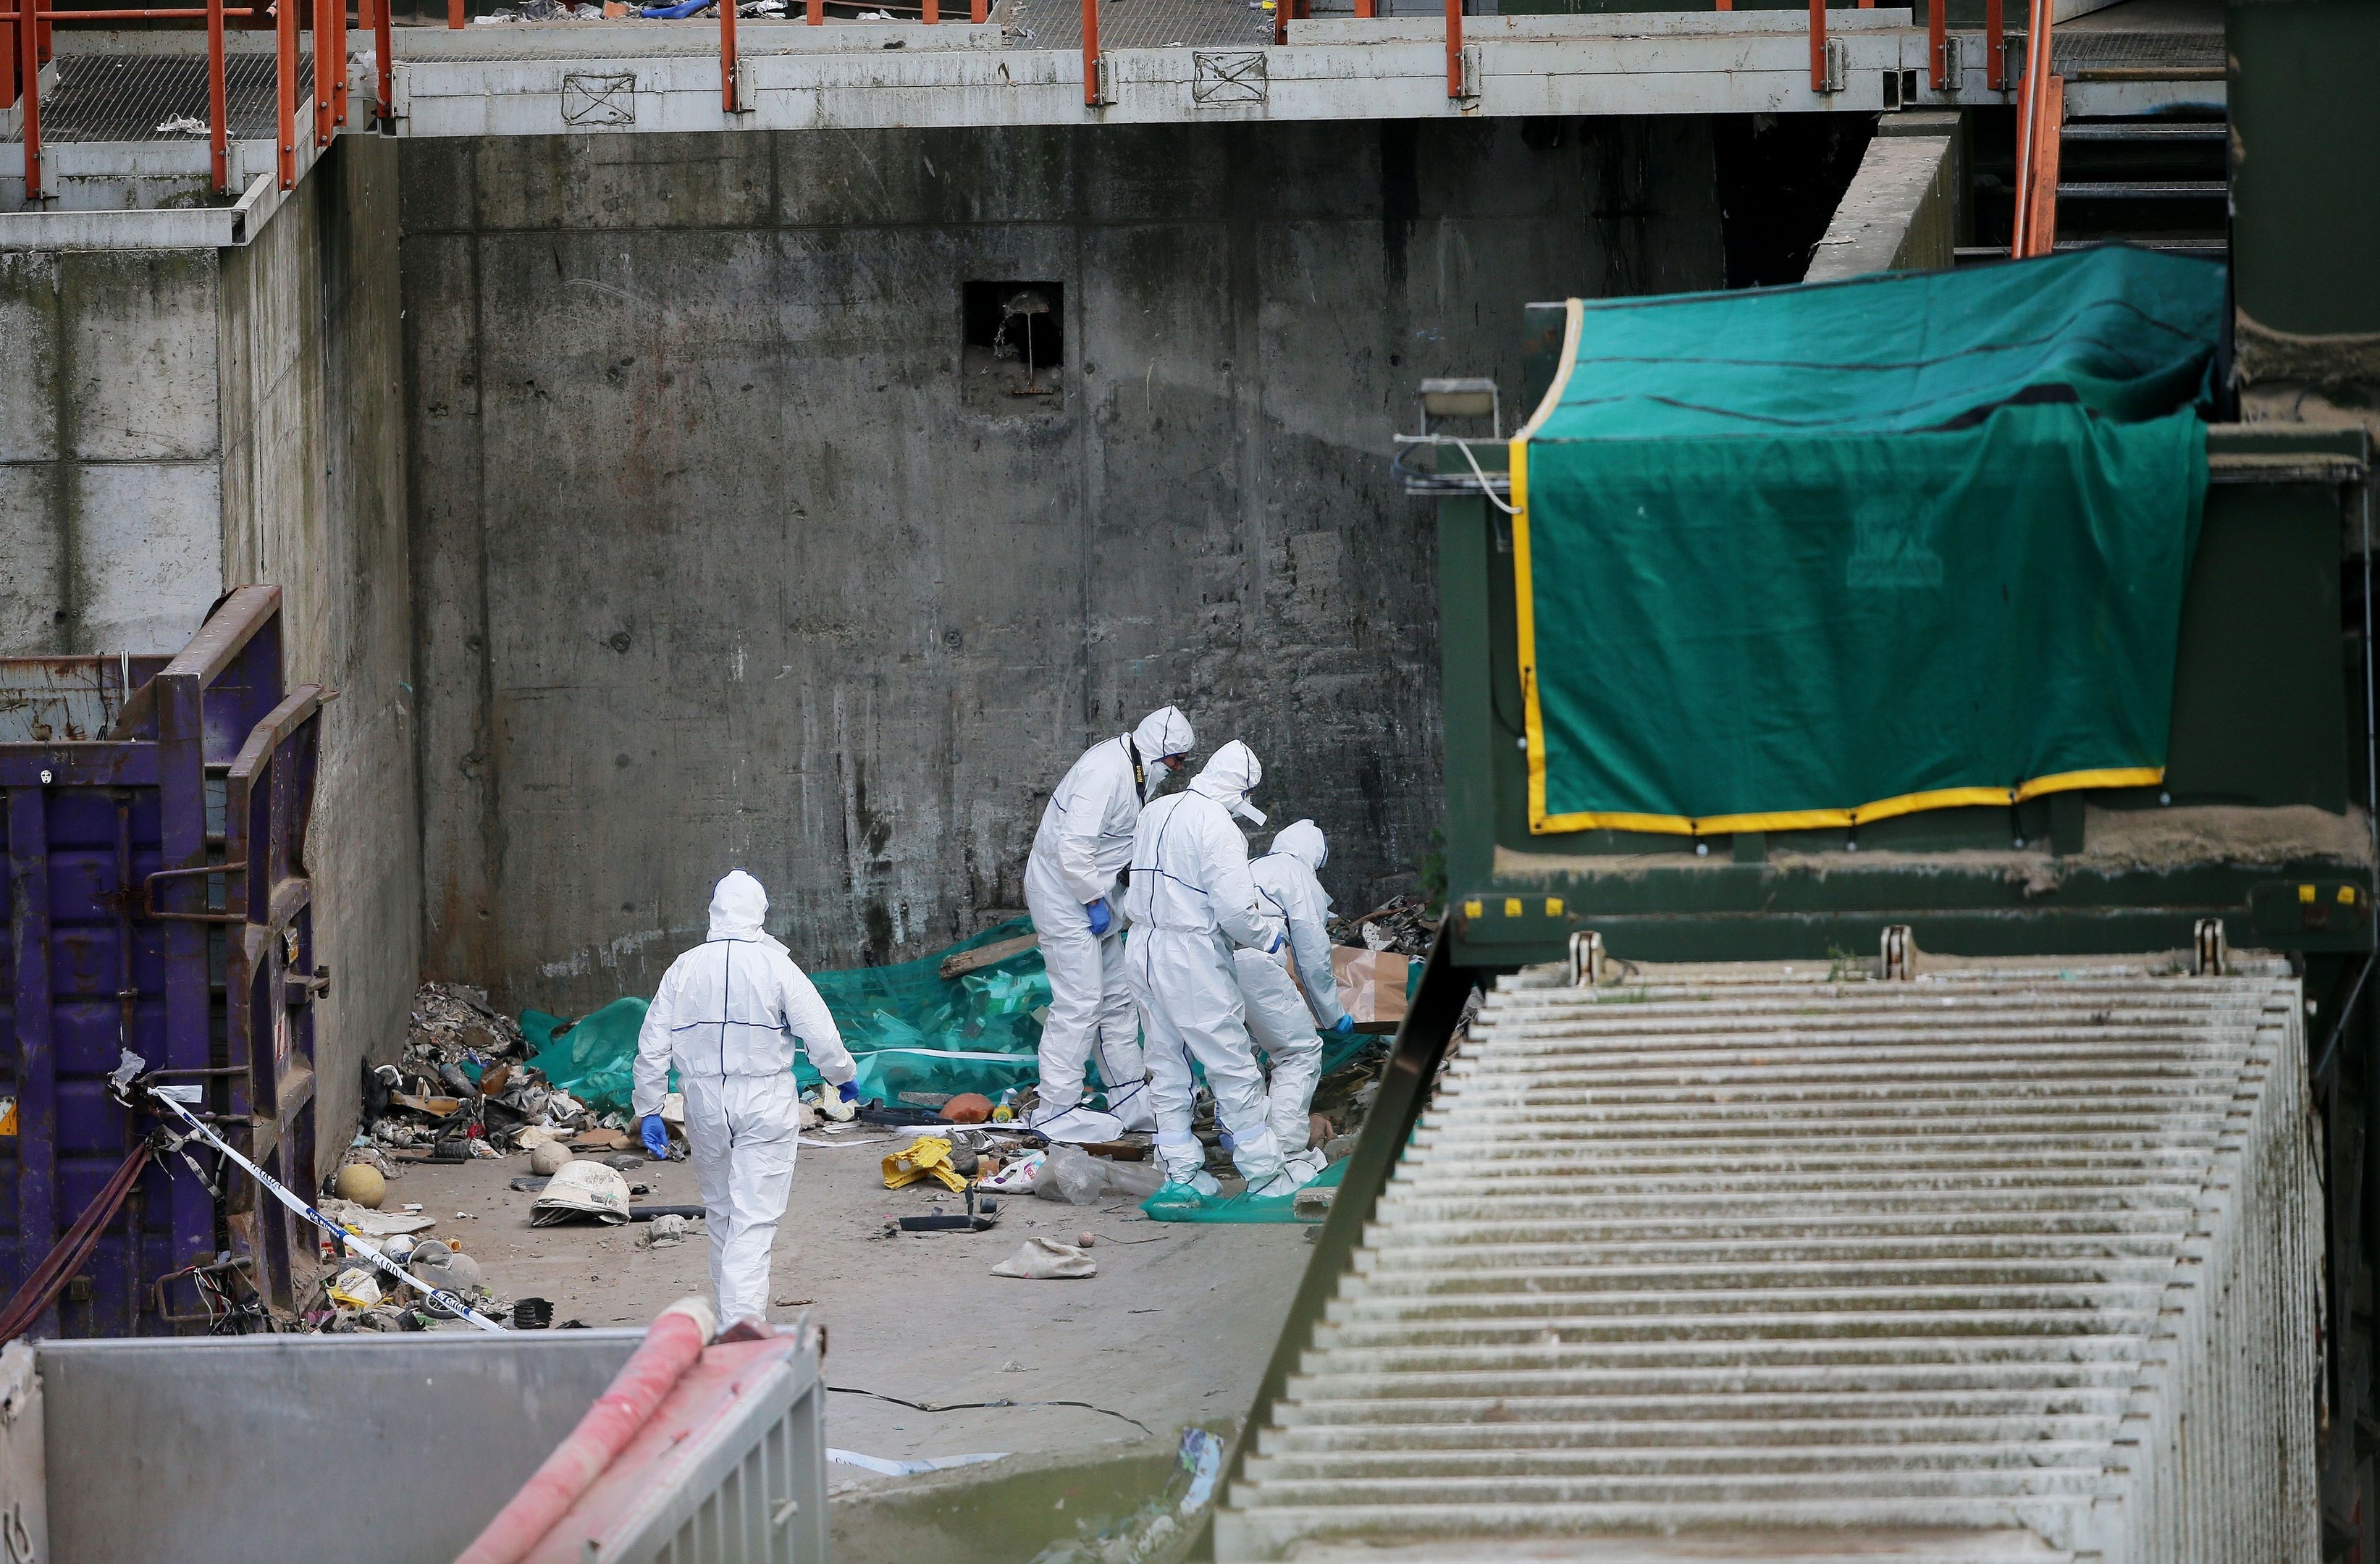 Forensic officers at the recycling facility in Bray, County Wicklow, Ireland, where suspected remains of a newborn baby have been discovered.